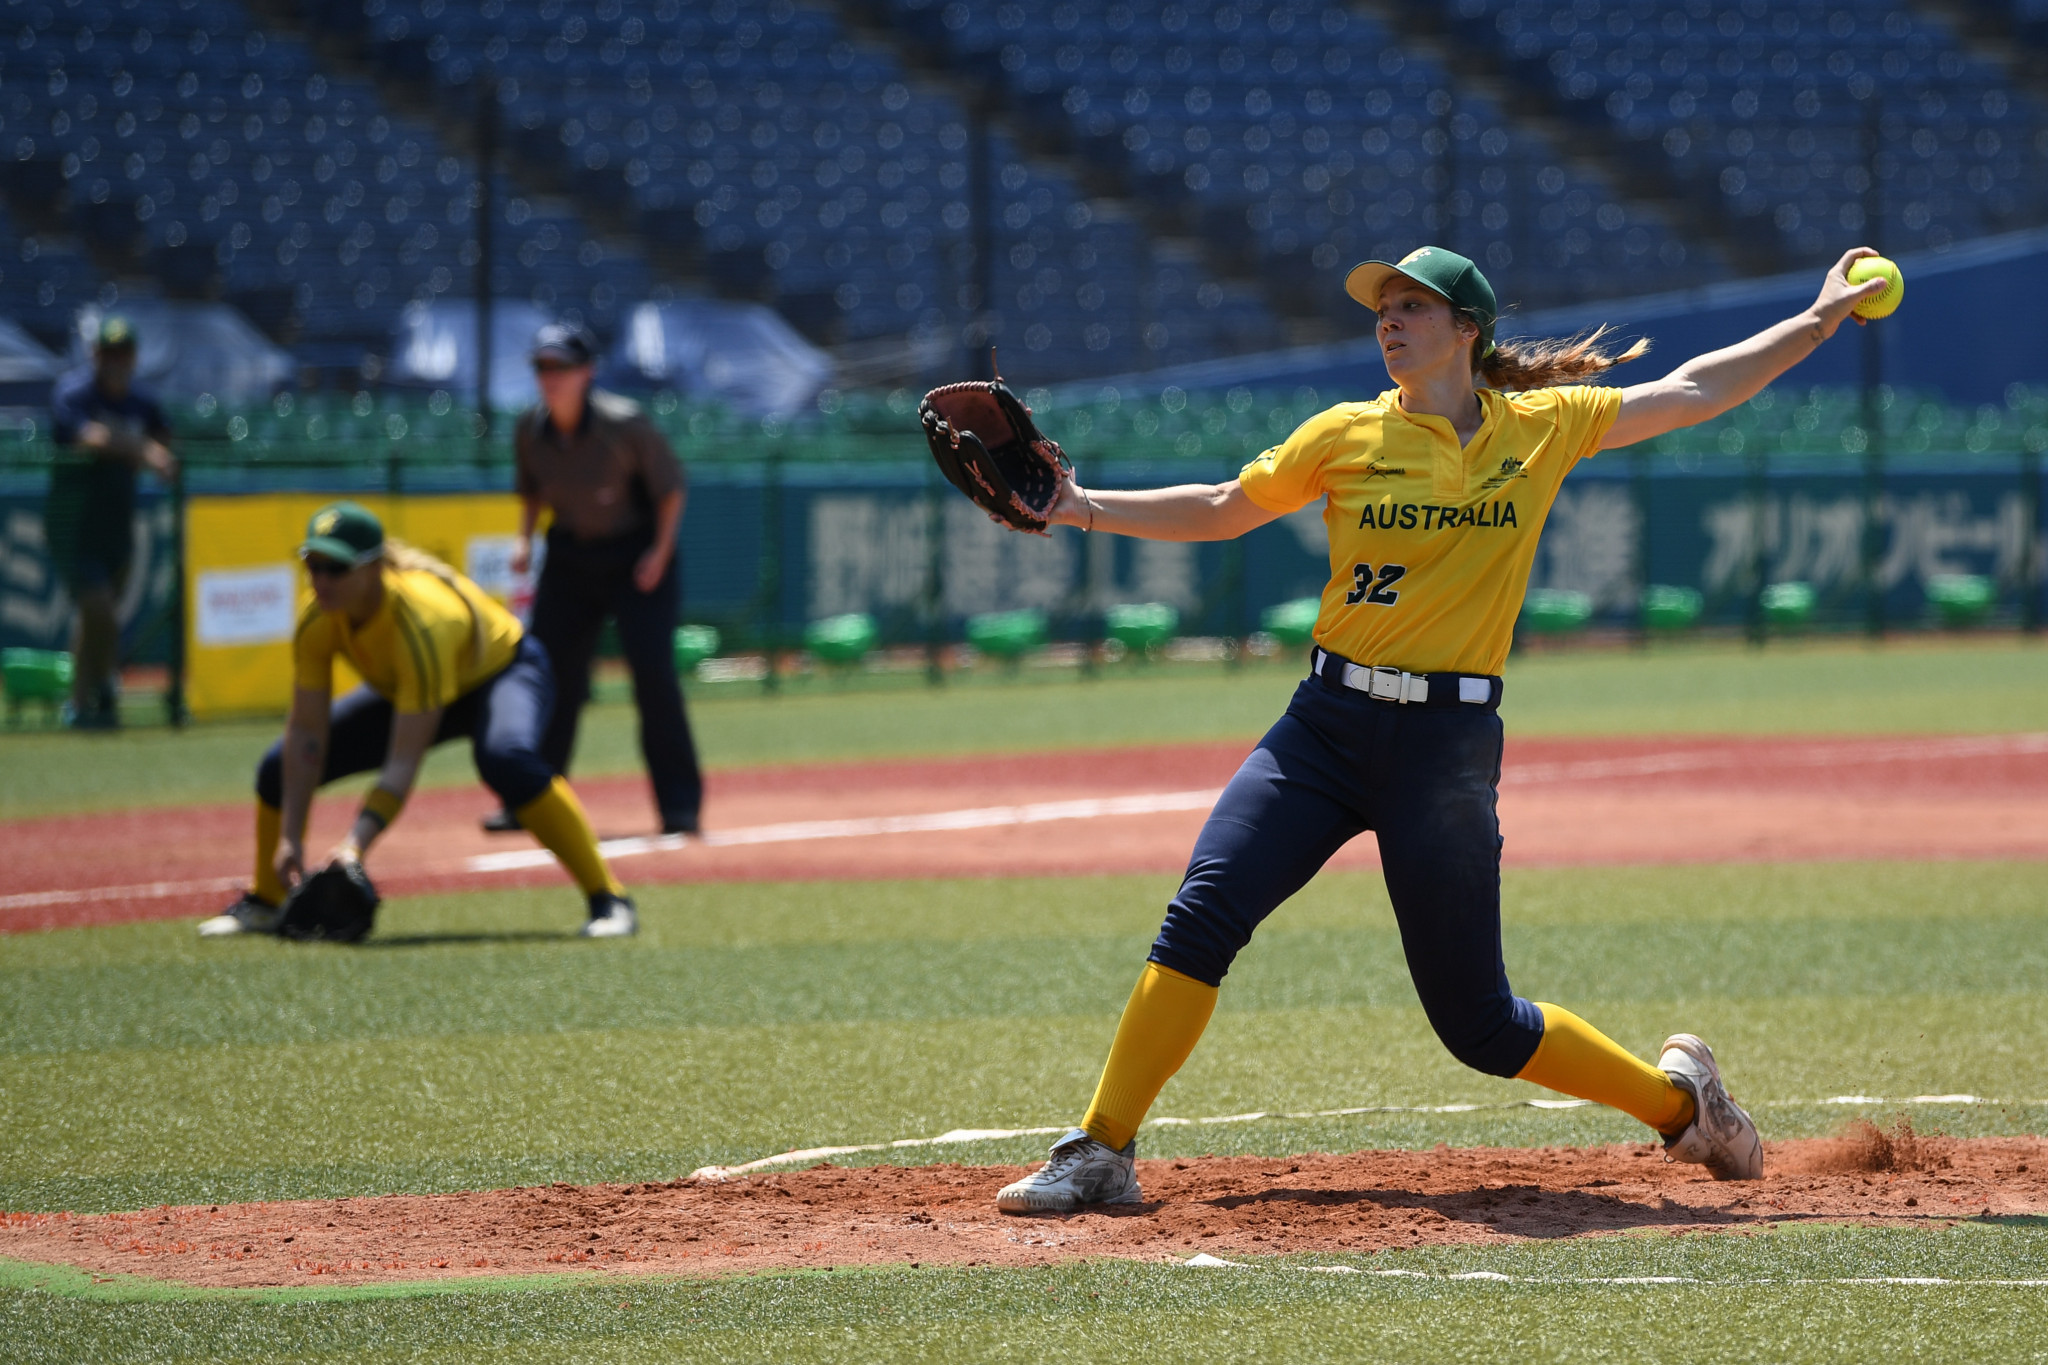 Tickets go on sale for WBSC Women's Softball World Cup Group Stage